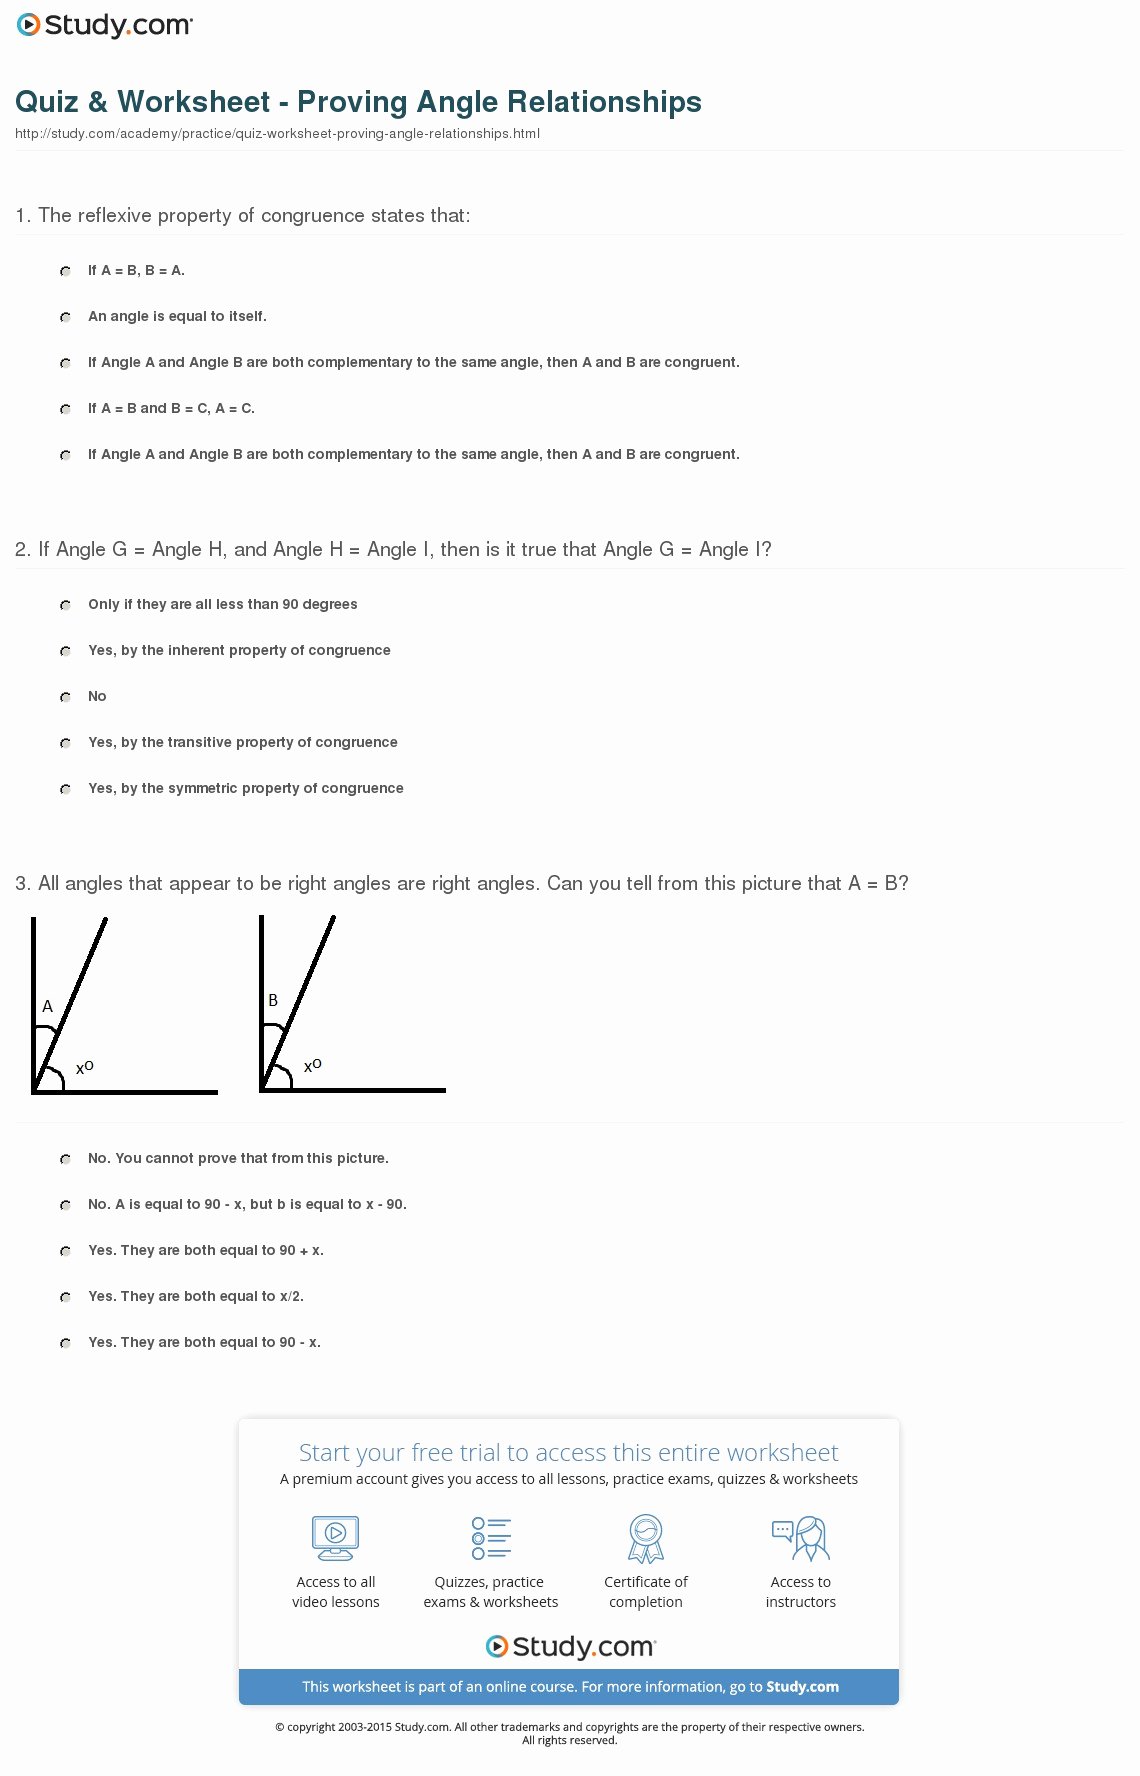 Angle Pair Relationships Practice Worksheet Elegant Quiz &amp; Worksheet Proving Angle Relationships